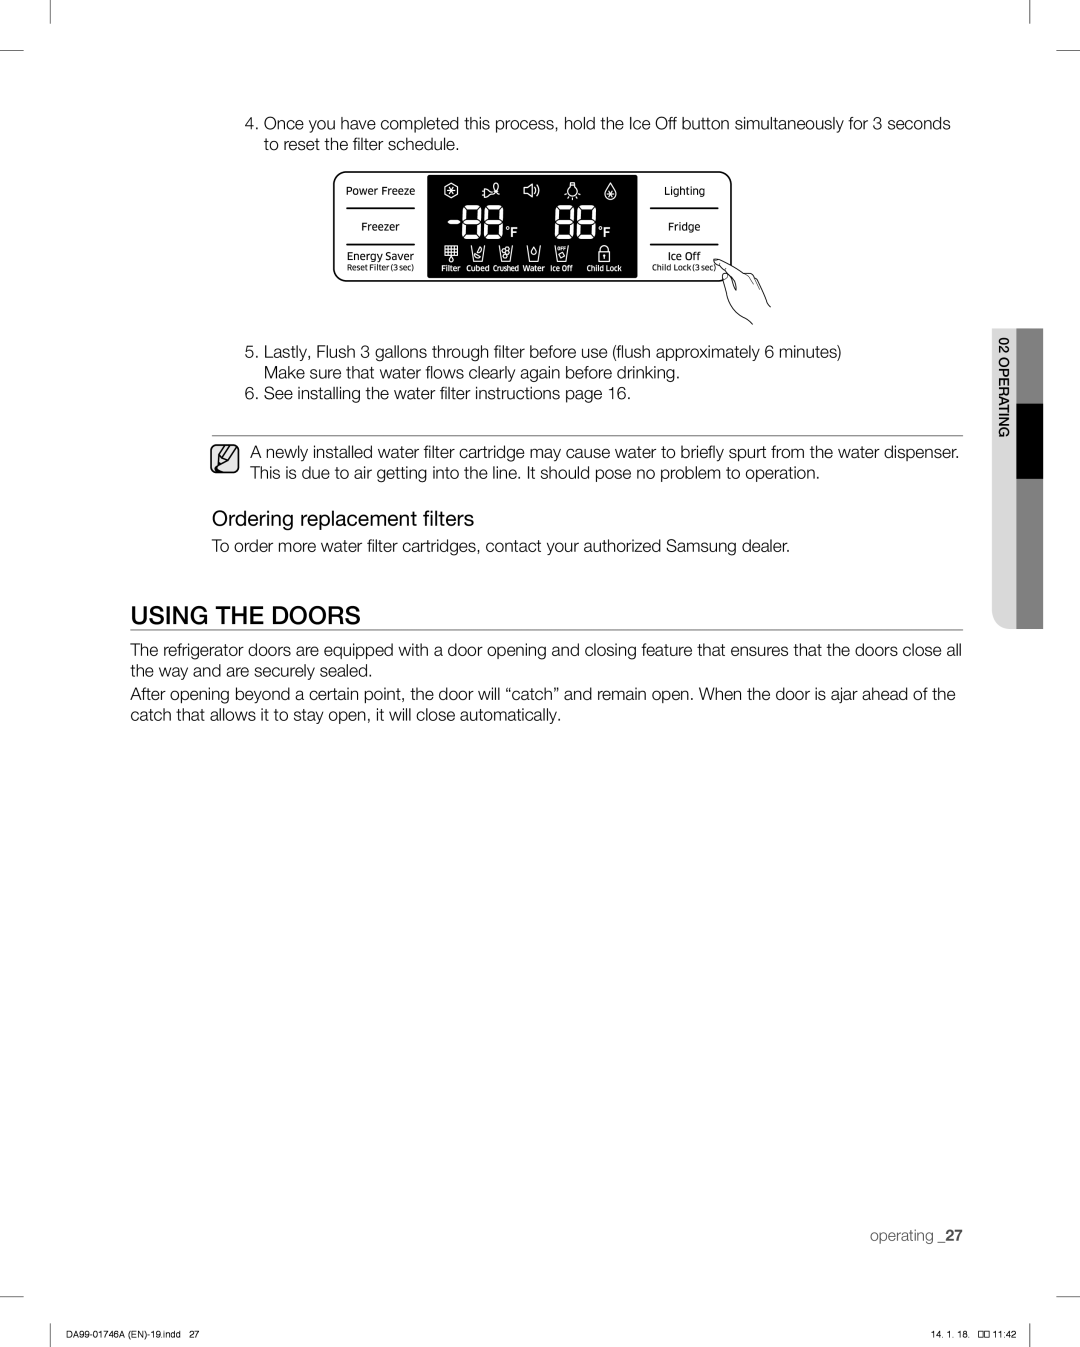 Samsung RSG257AA user manual Using The Doors, Ordering replacement filters 